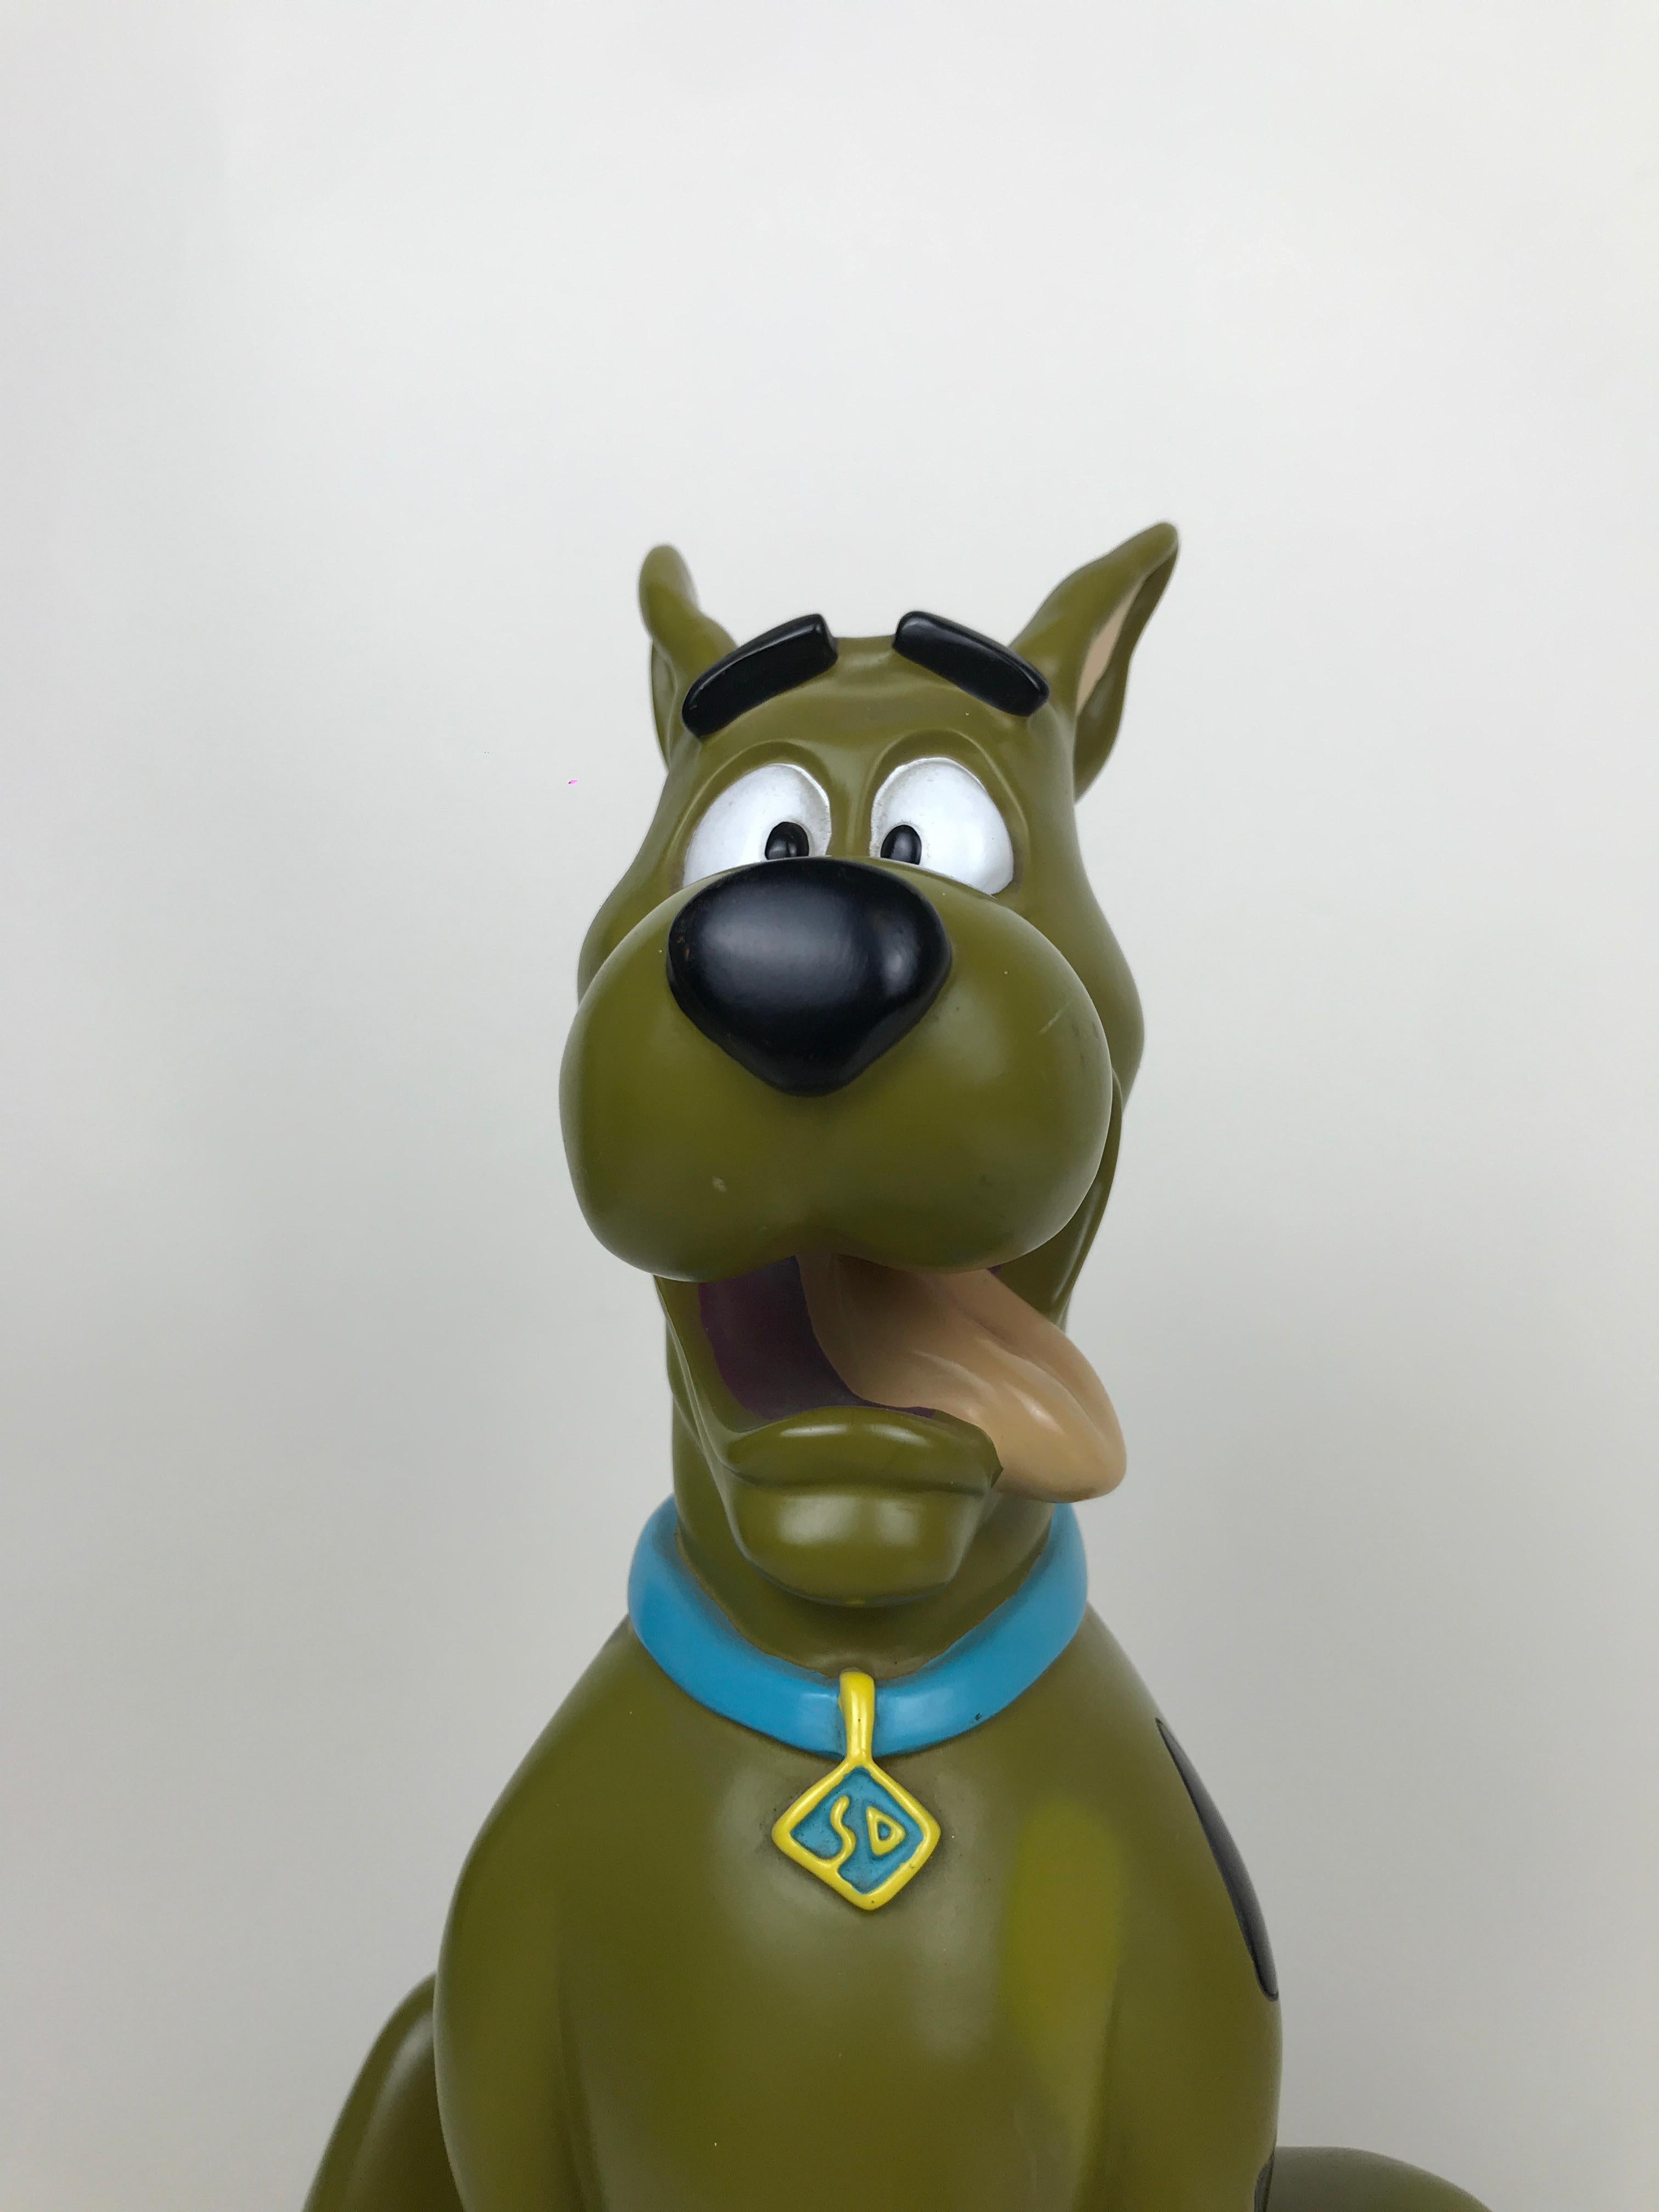 1990s Vintage Resin Hanna-Barbera Scooby-Doo Statue by Warner Bros Studio Store  In Good Condition For Sale In Milan, IT